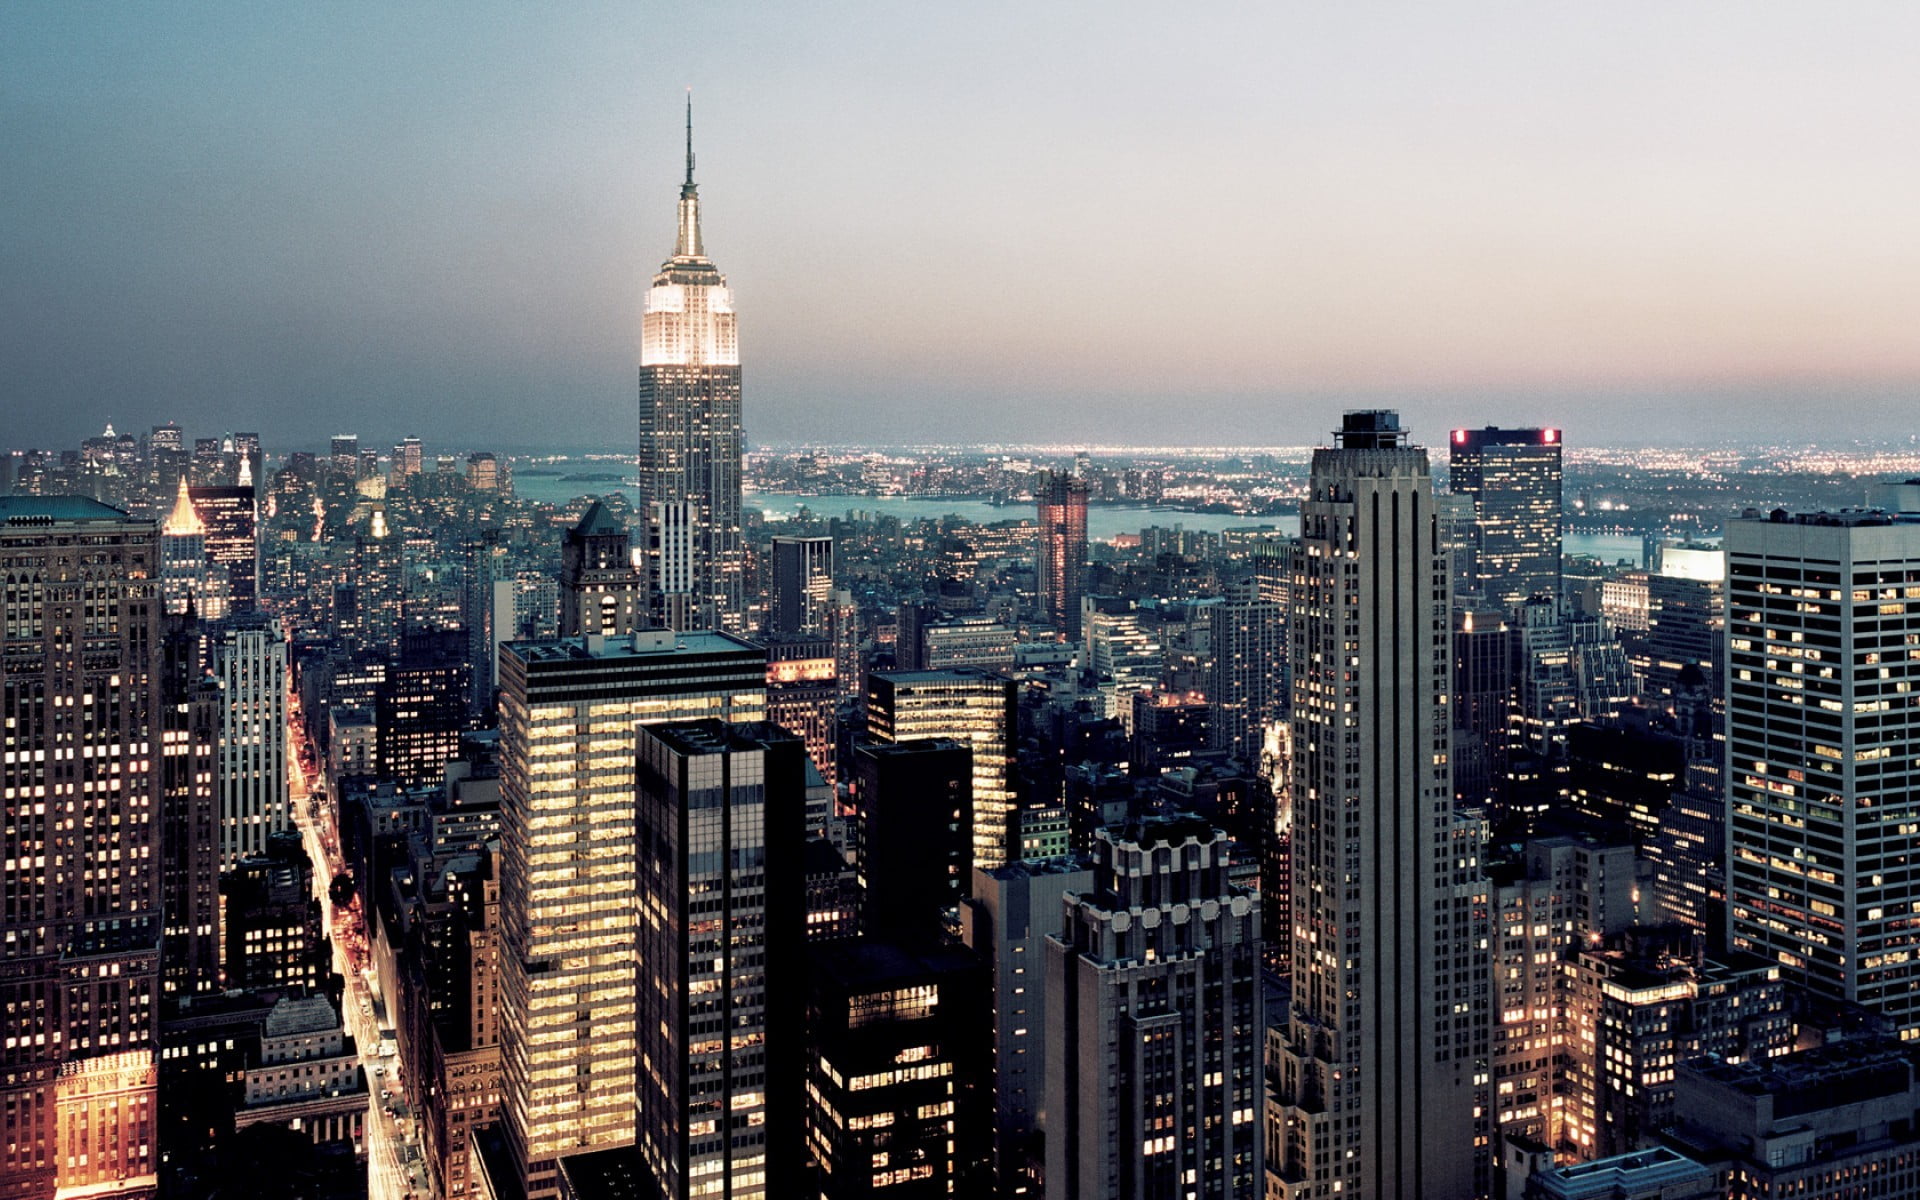 high-rise buildings, city, cityscape, New York City, Empire State Building